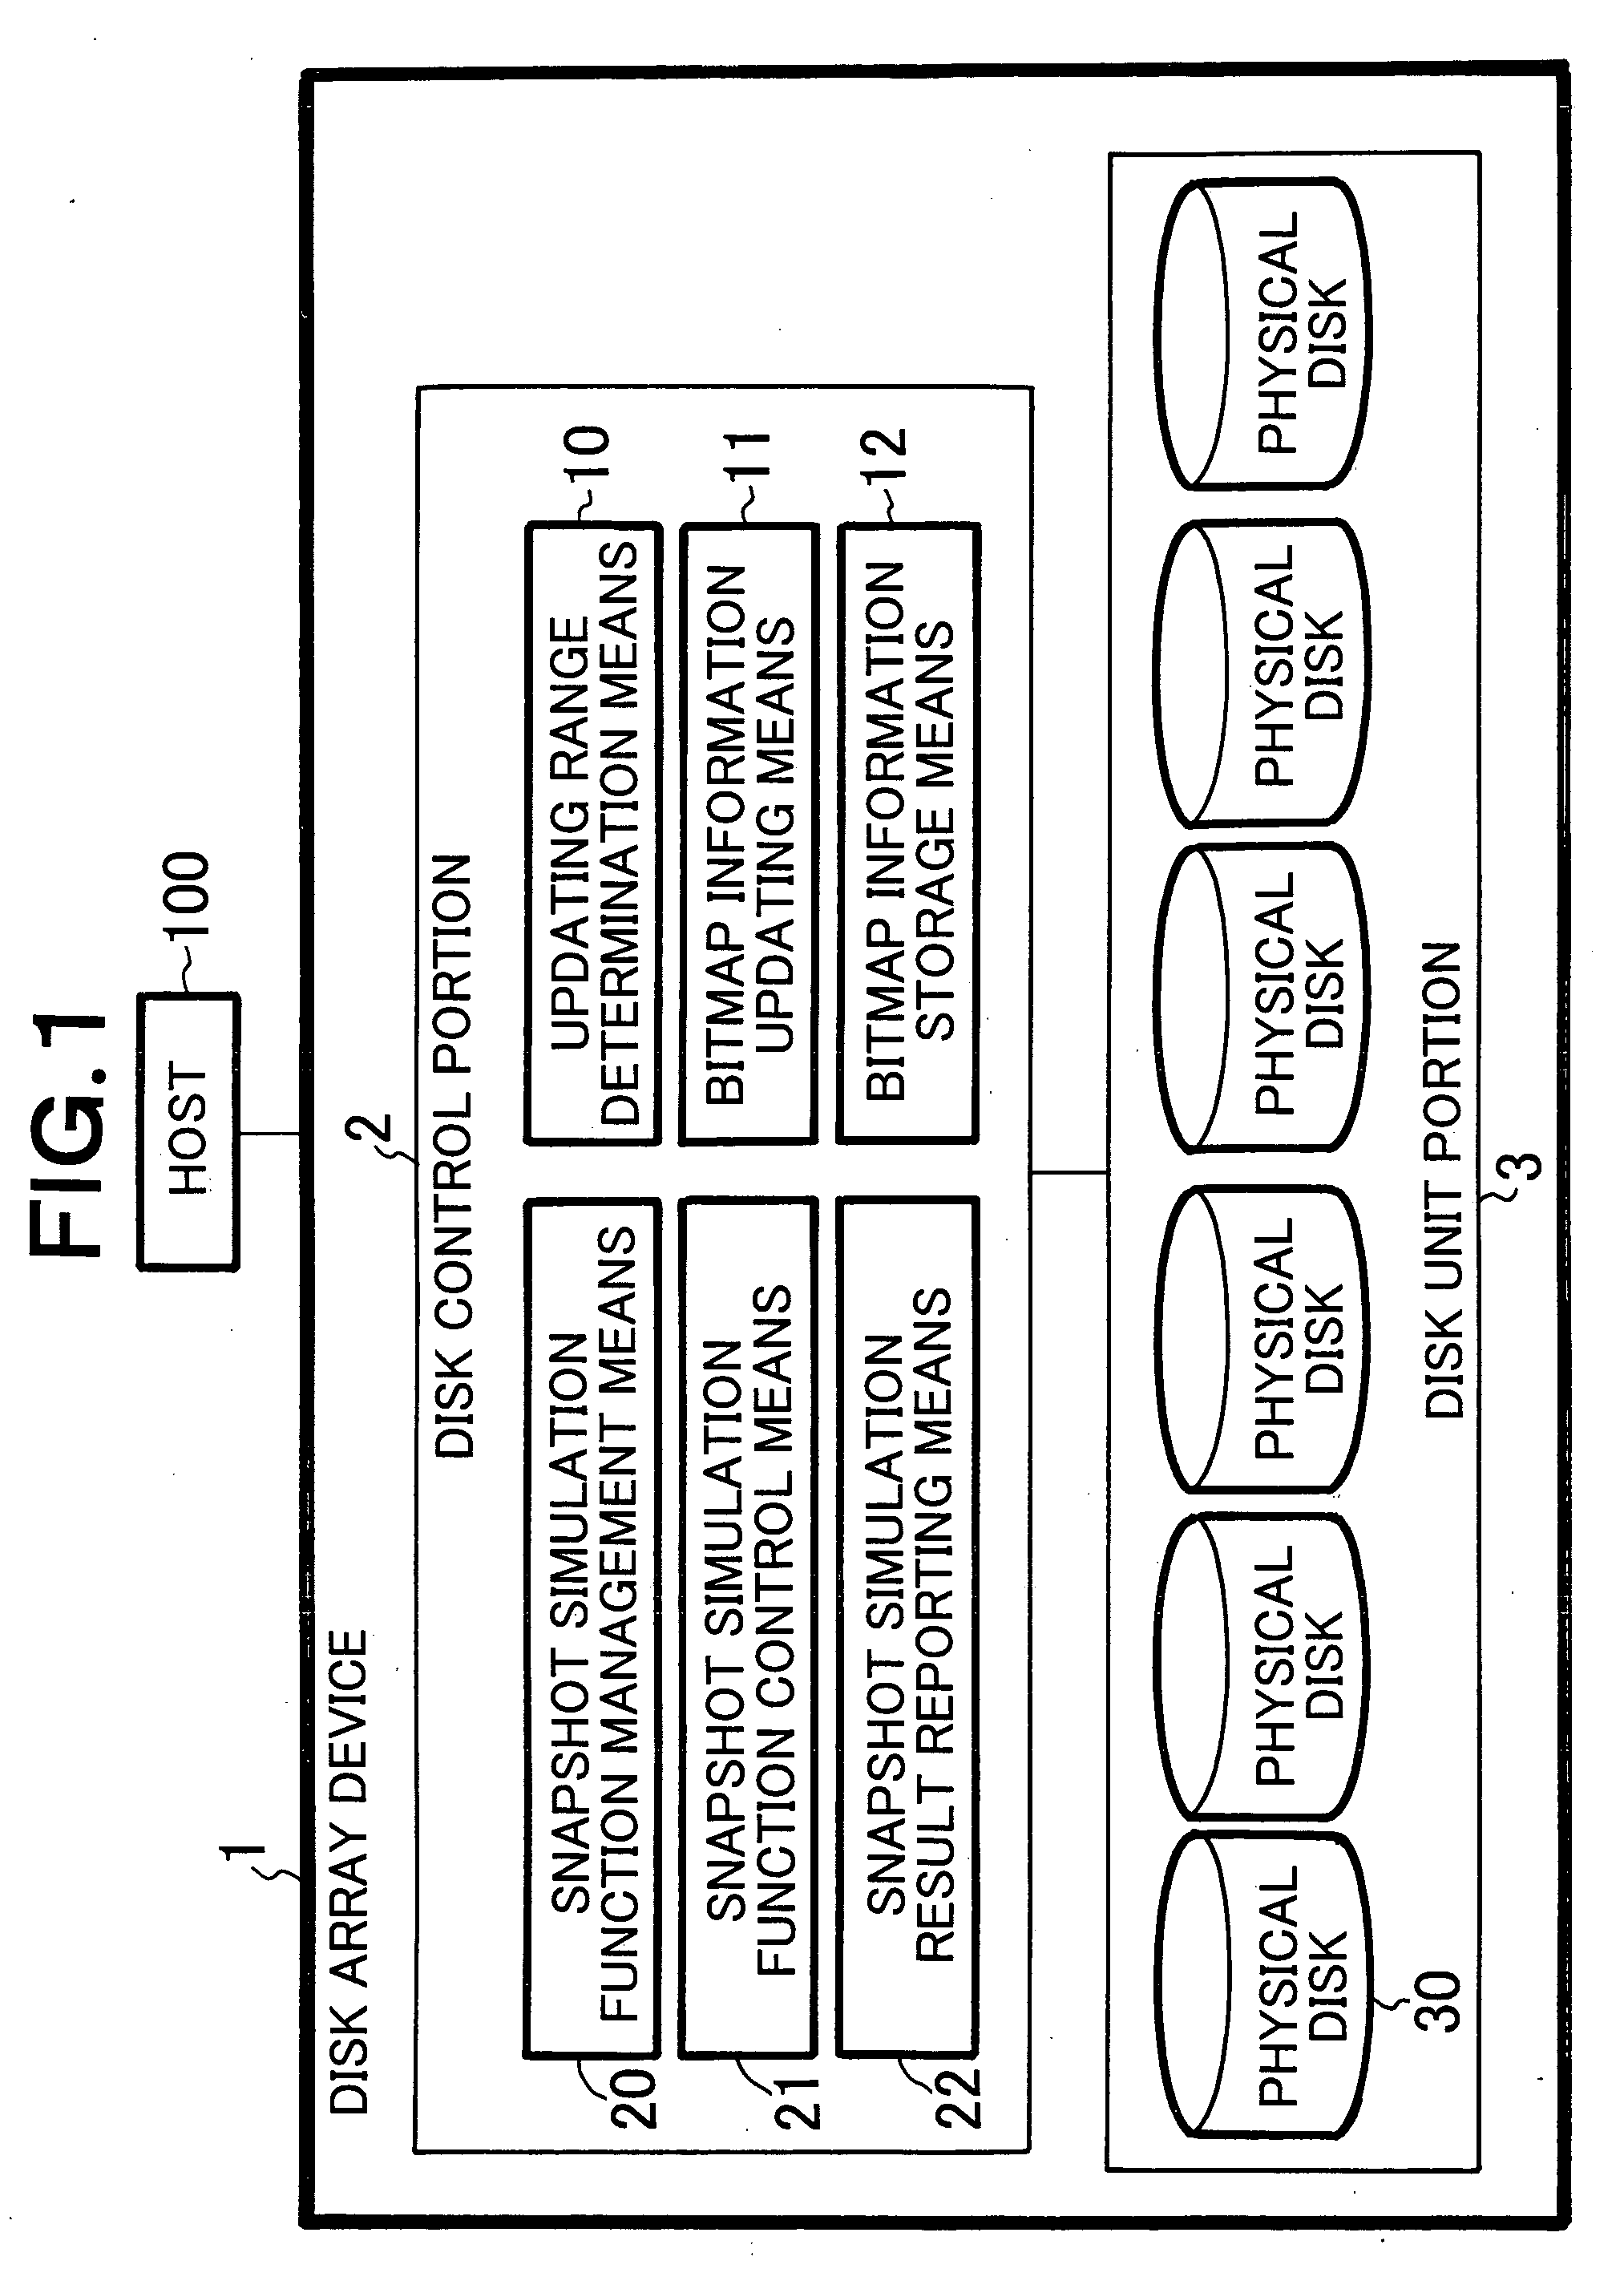 Disk array device having snapshot simulation function